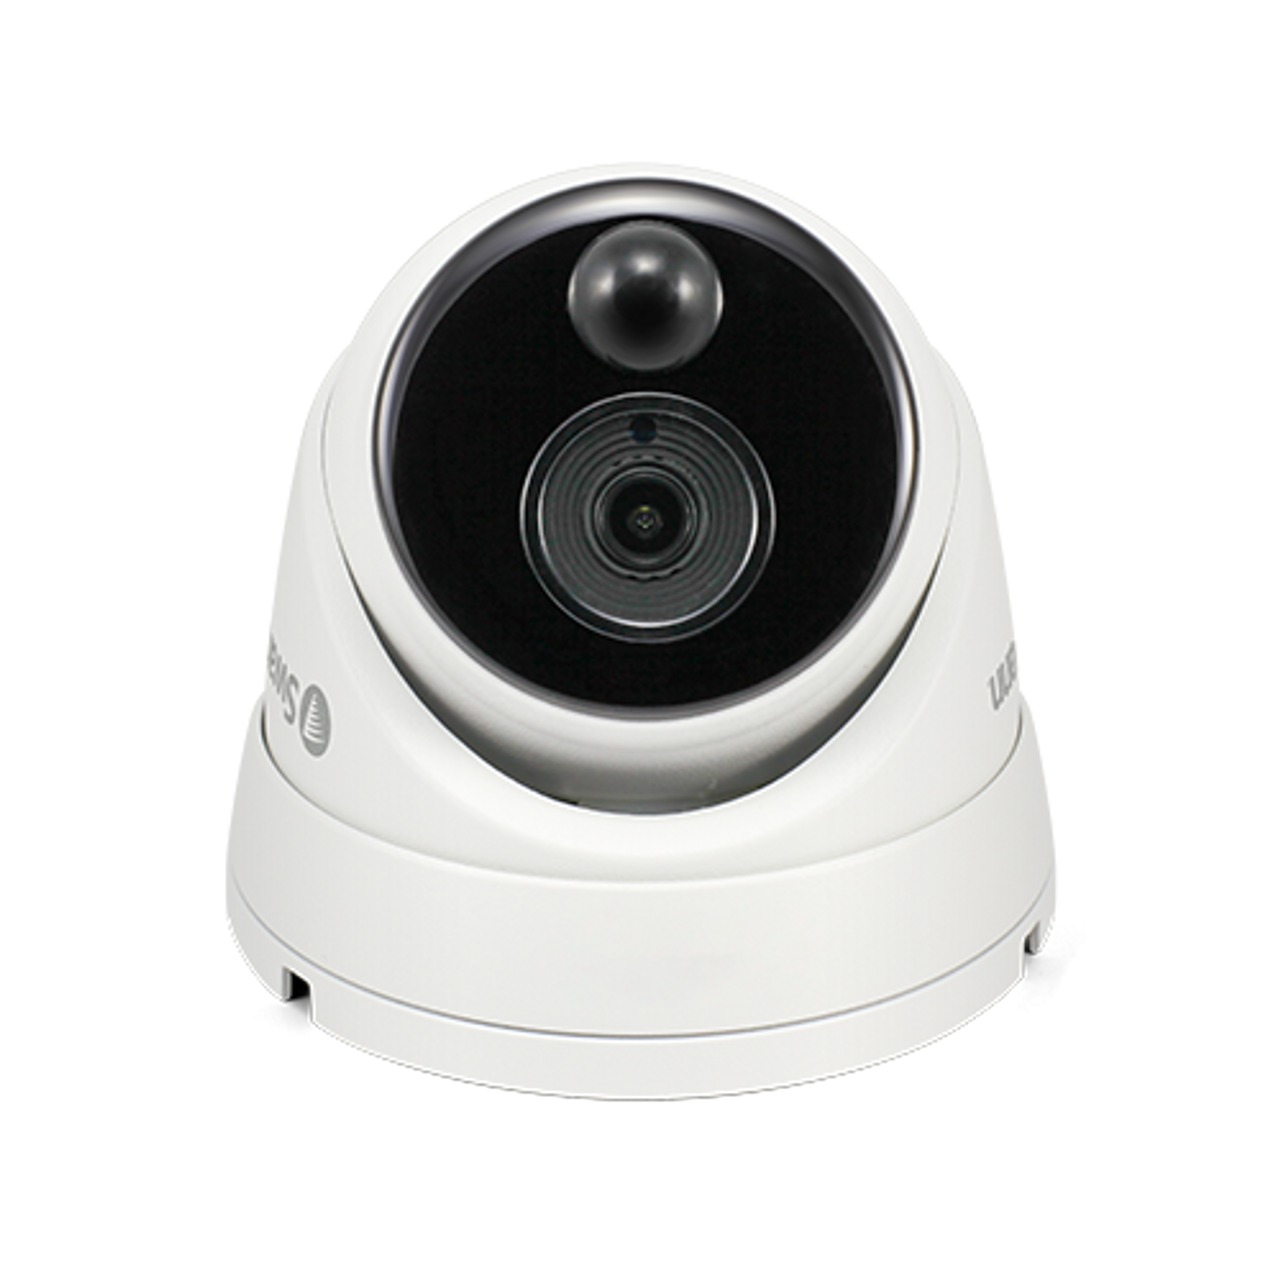 1080p full hd thermal sensing dome security camera - pro-1080msd - swpro-1080msd   tech supply shed